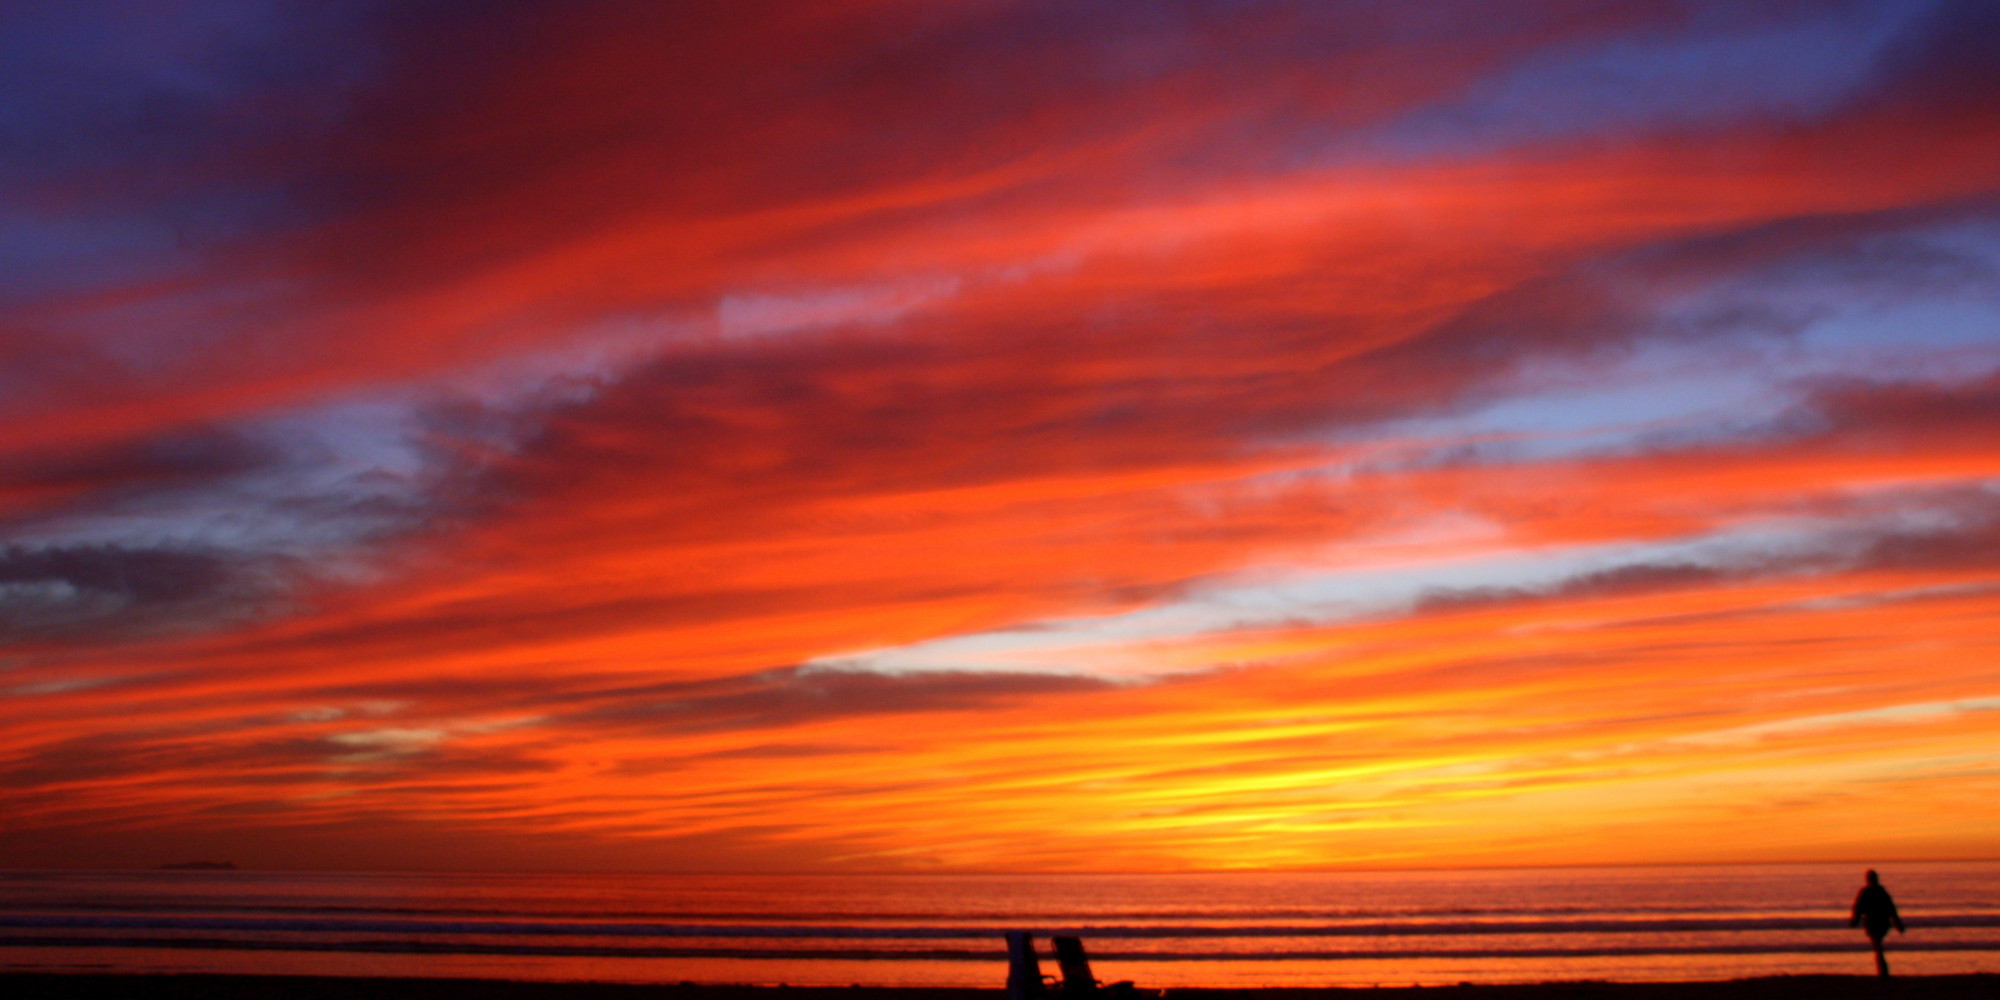 Beautiful Sunsets (and Sunrises) in Art | HuffPost